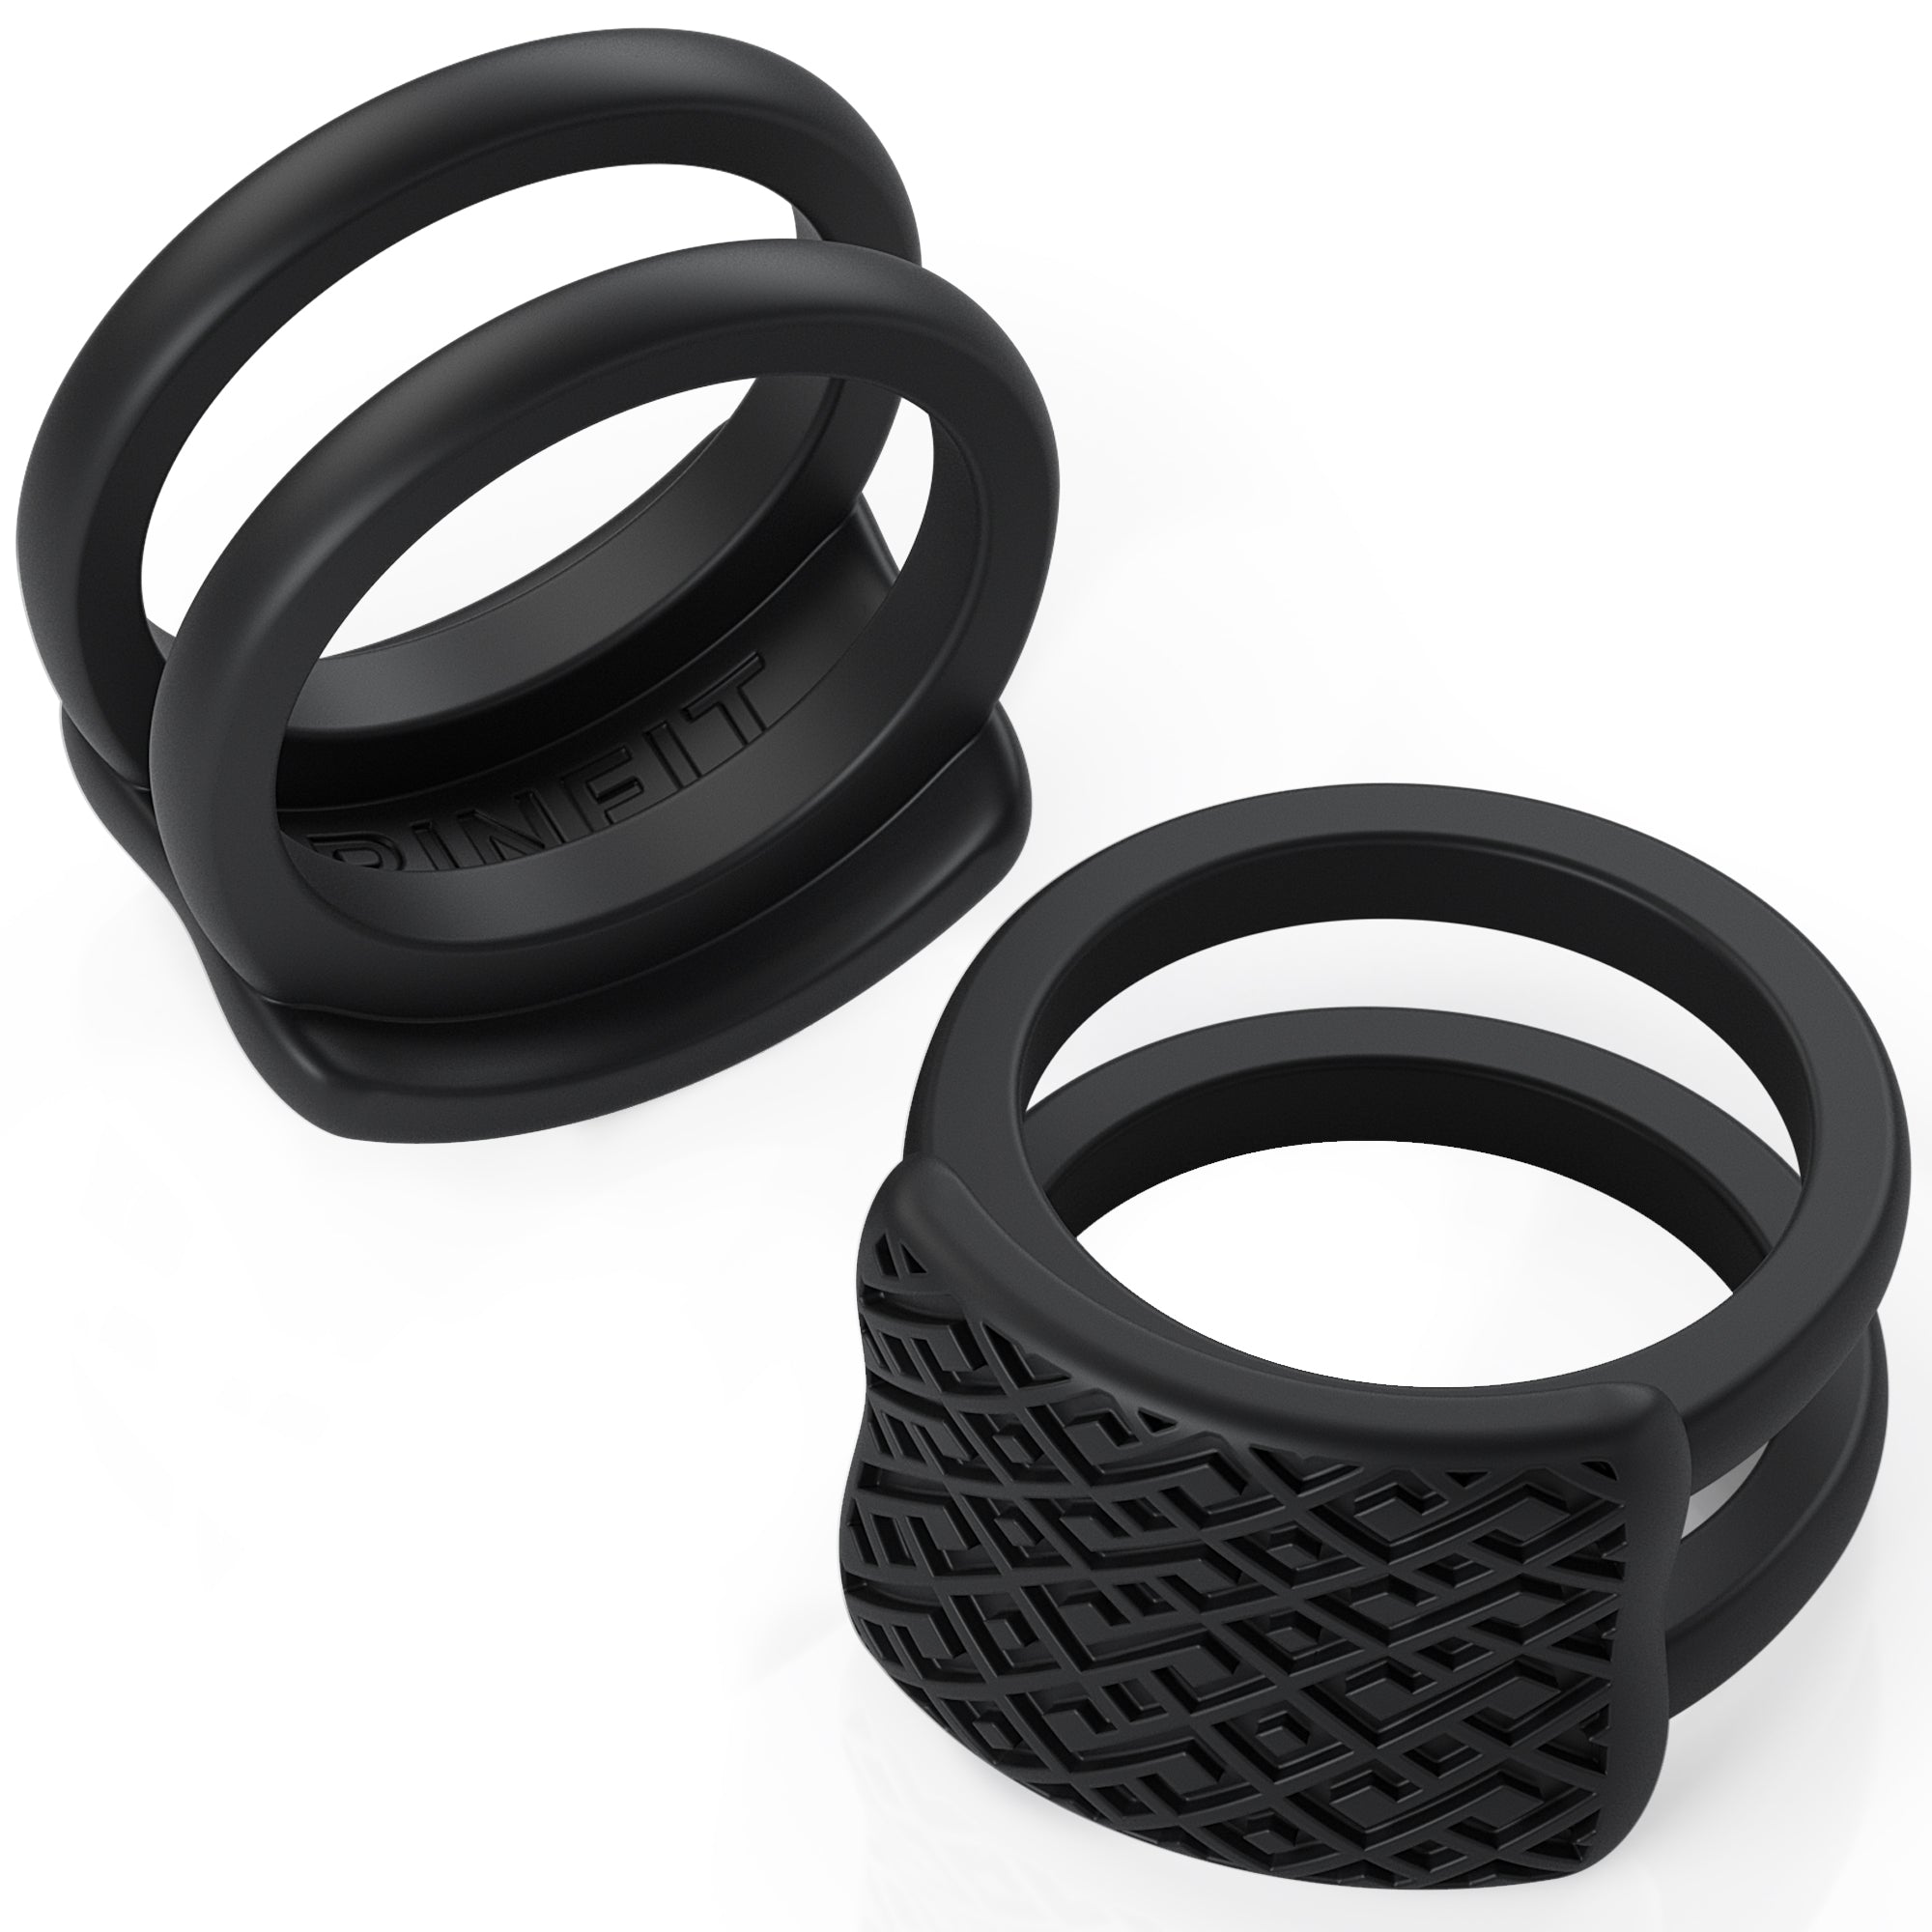  RingSkin Silicone Ring Protector for Working Out. Engagement  and Wedding Ring Protector. (3-pack with Protective Case): Clothing, Shoes  & Jewelry